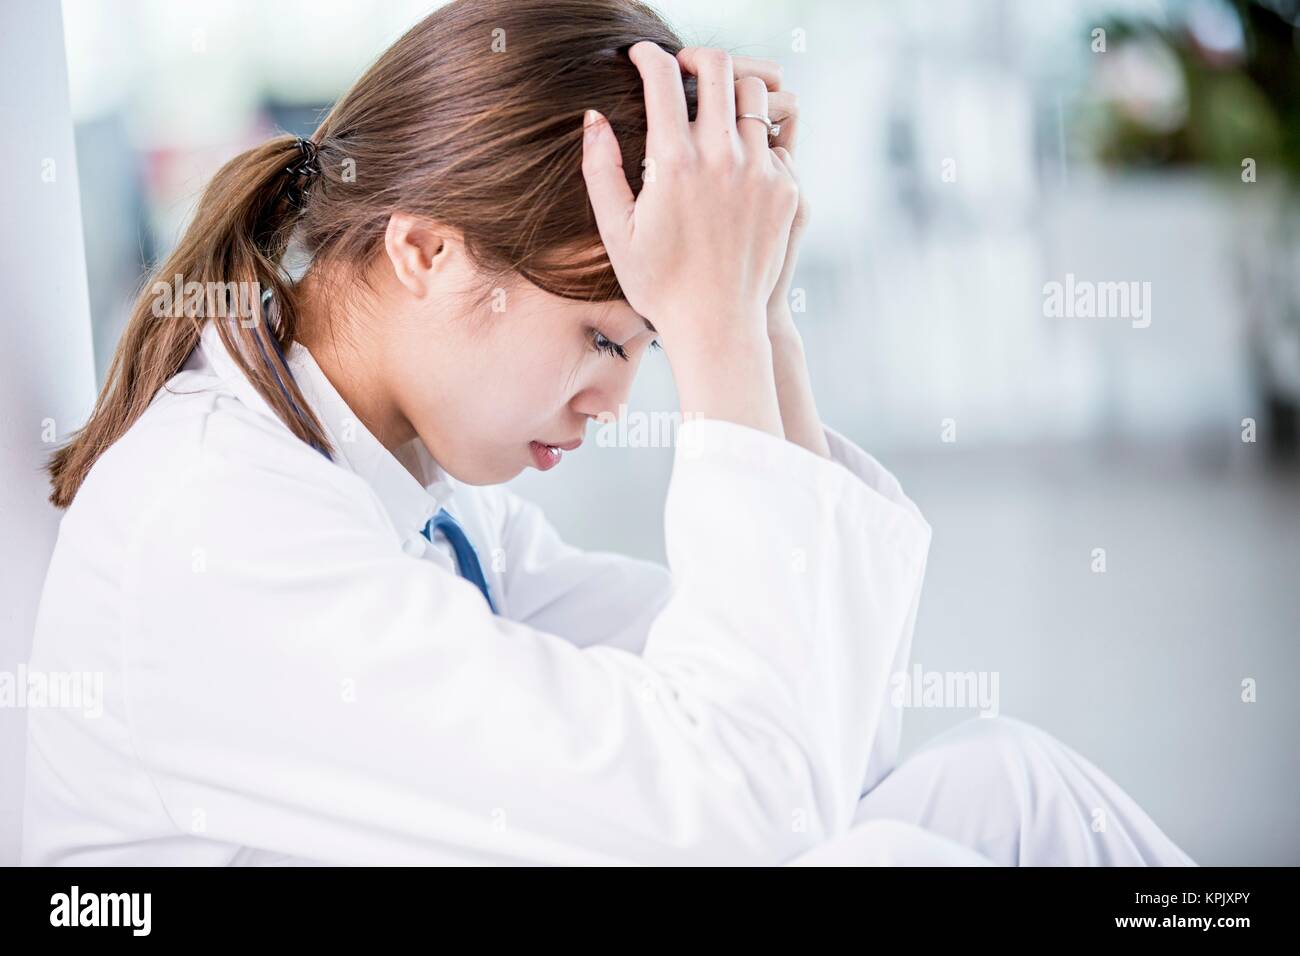 Young female medical student with head in hands. Stock Photo